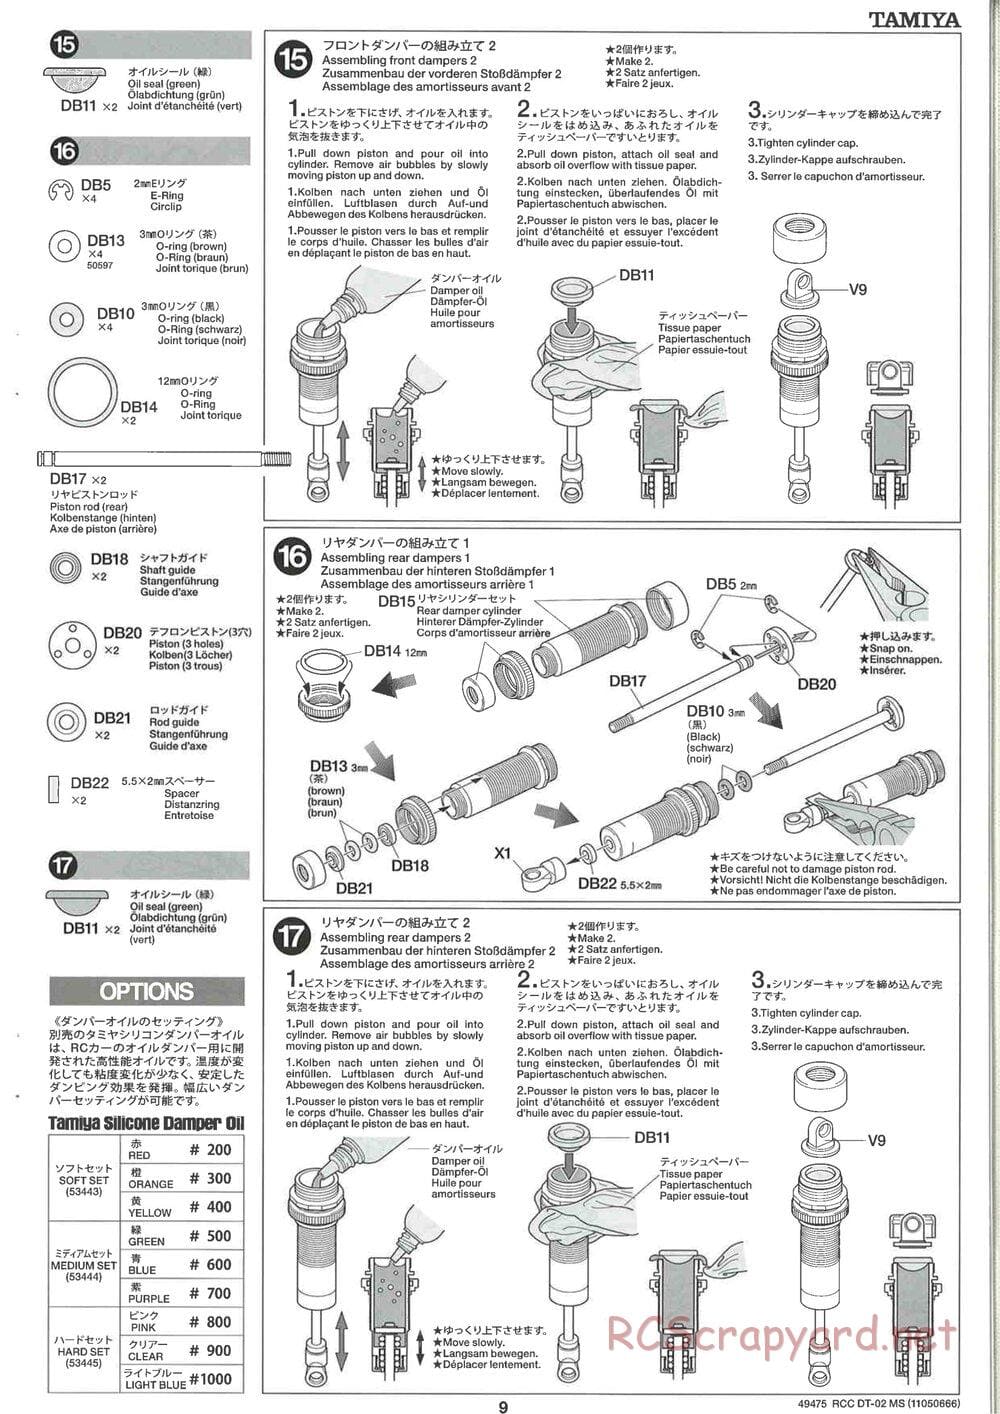 Tamiya - DT-02 MS Chassis - Manual - Page 10